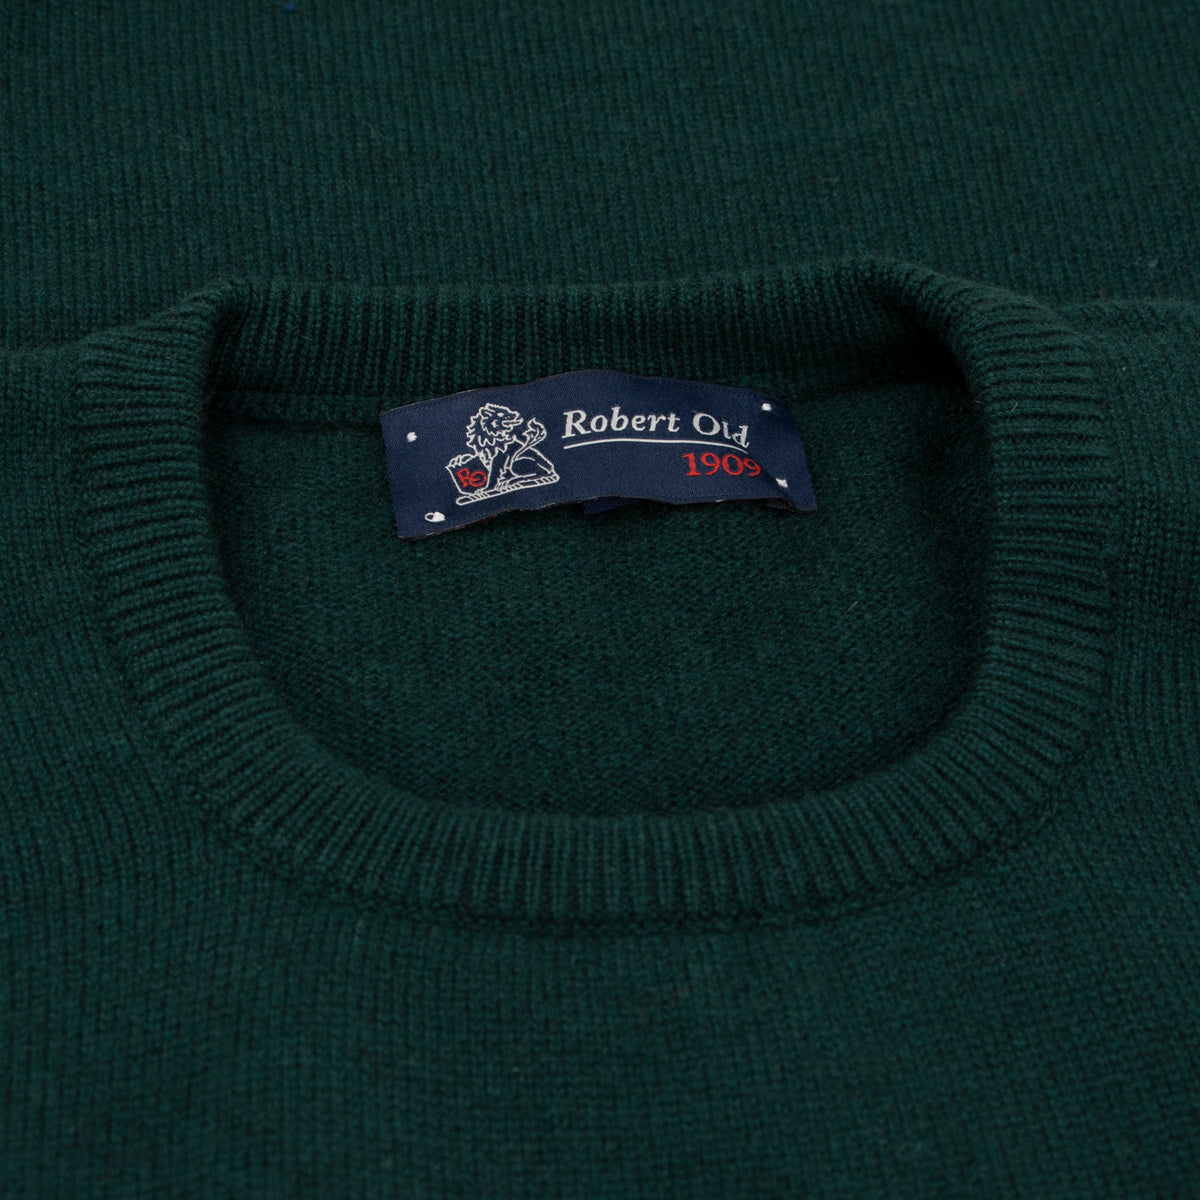 Holly Green Tiree 4ply Crew Neck Cashmere Sweater  Robert Old   